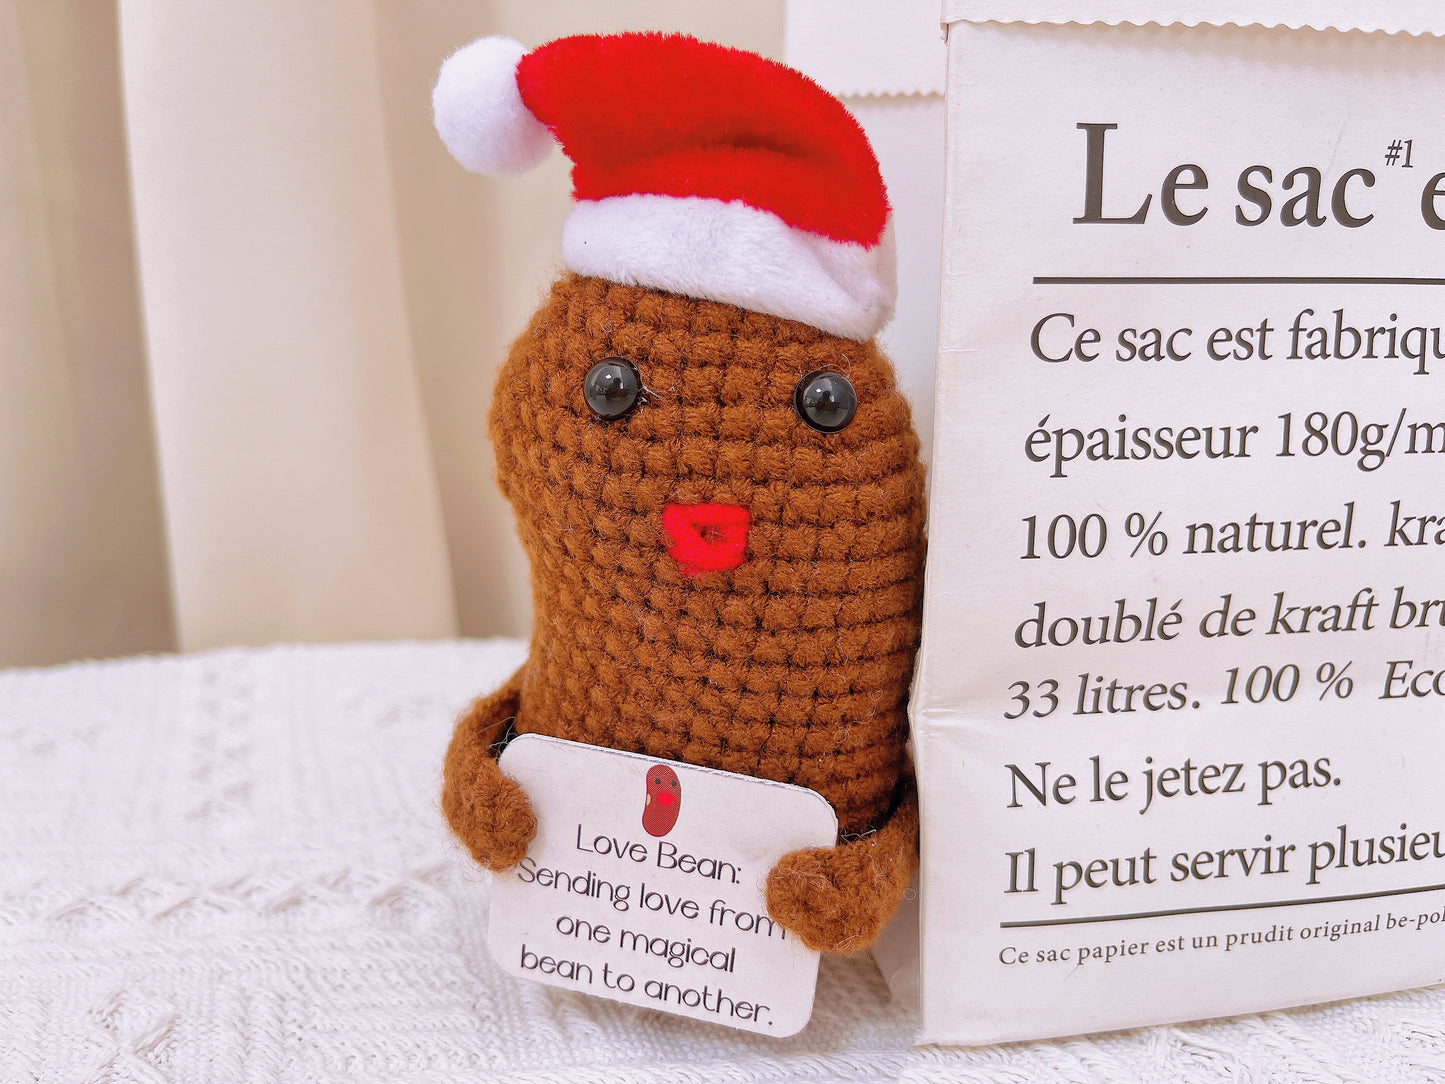 Handcrafted Love Bean with Cozy Christmas Hat and Greeting Card - Perfect for Holiday Decor and Gifting